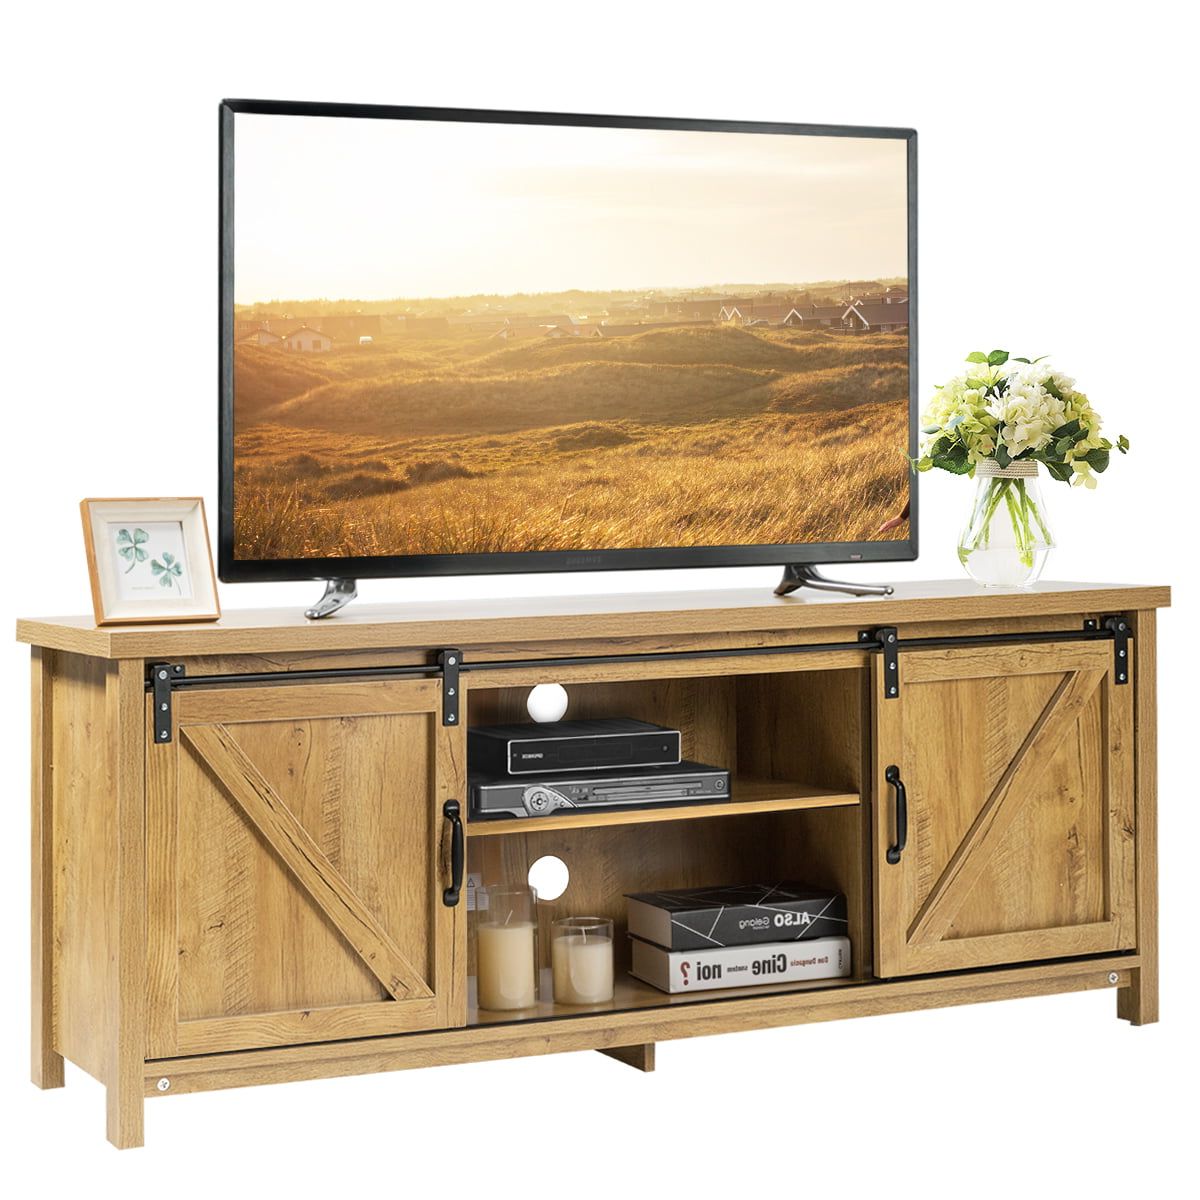 Costway Tv Stand Media Center Console Cabinet Sliding Barn Door For Tv Throughout Favorite Barn Door Media Tv Stands (View 8 of 15)